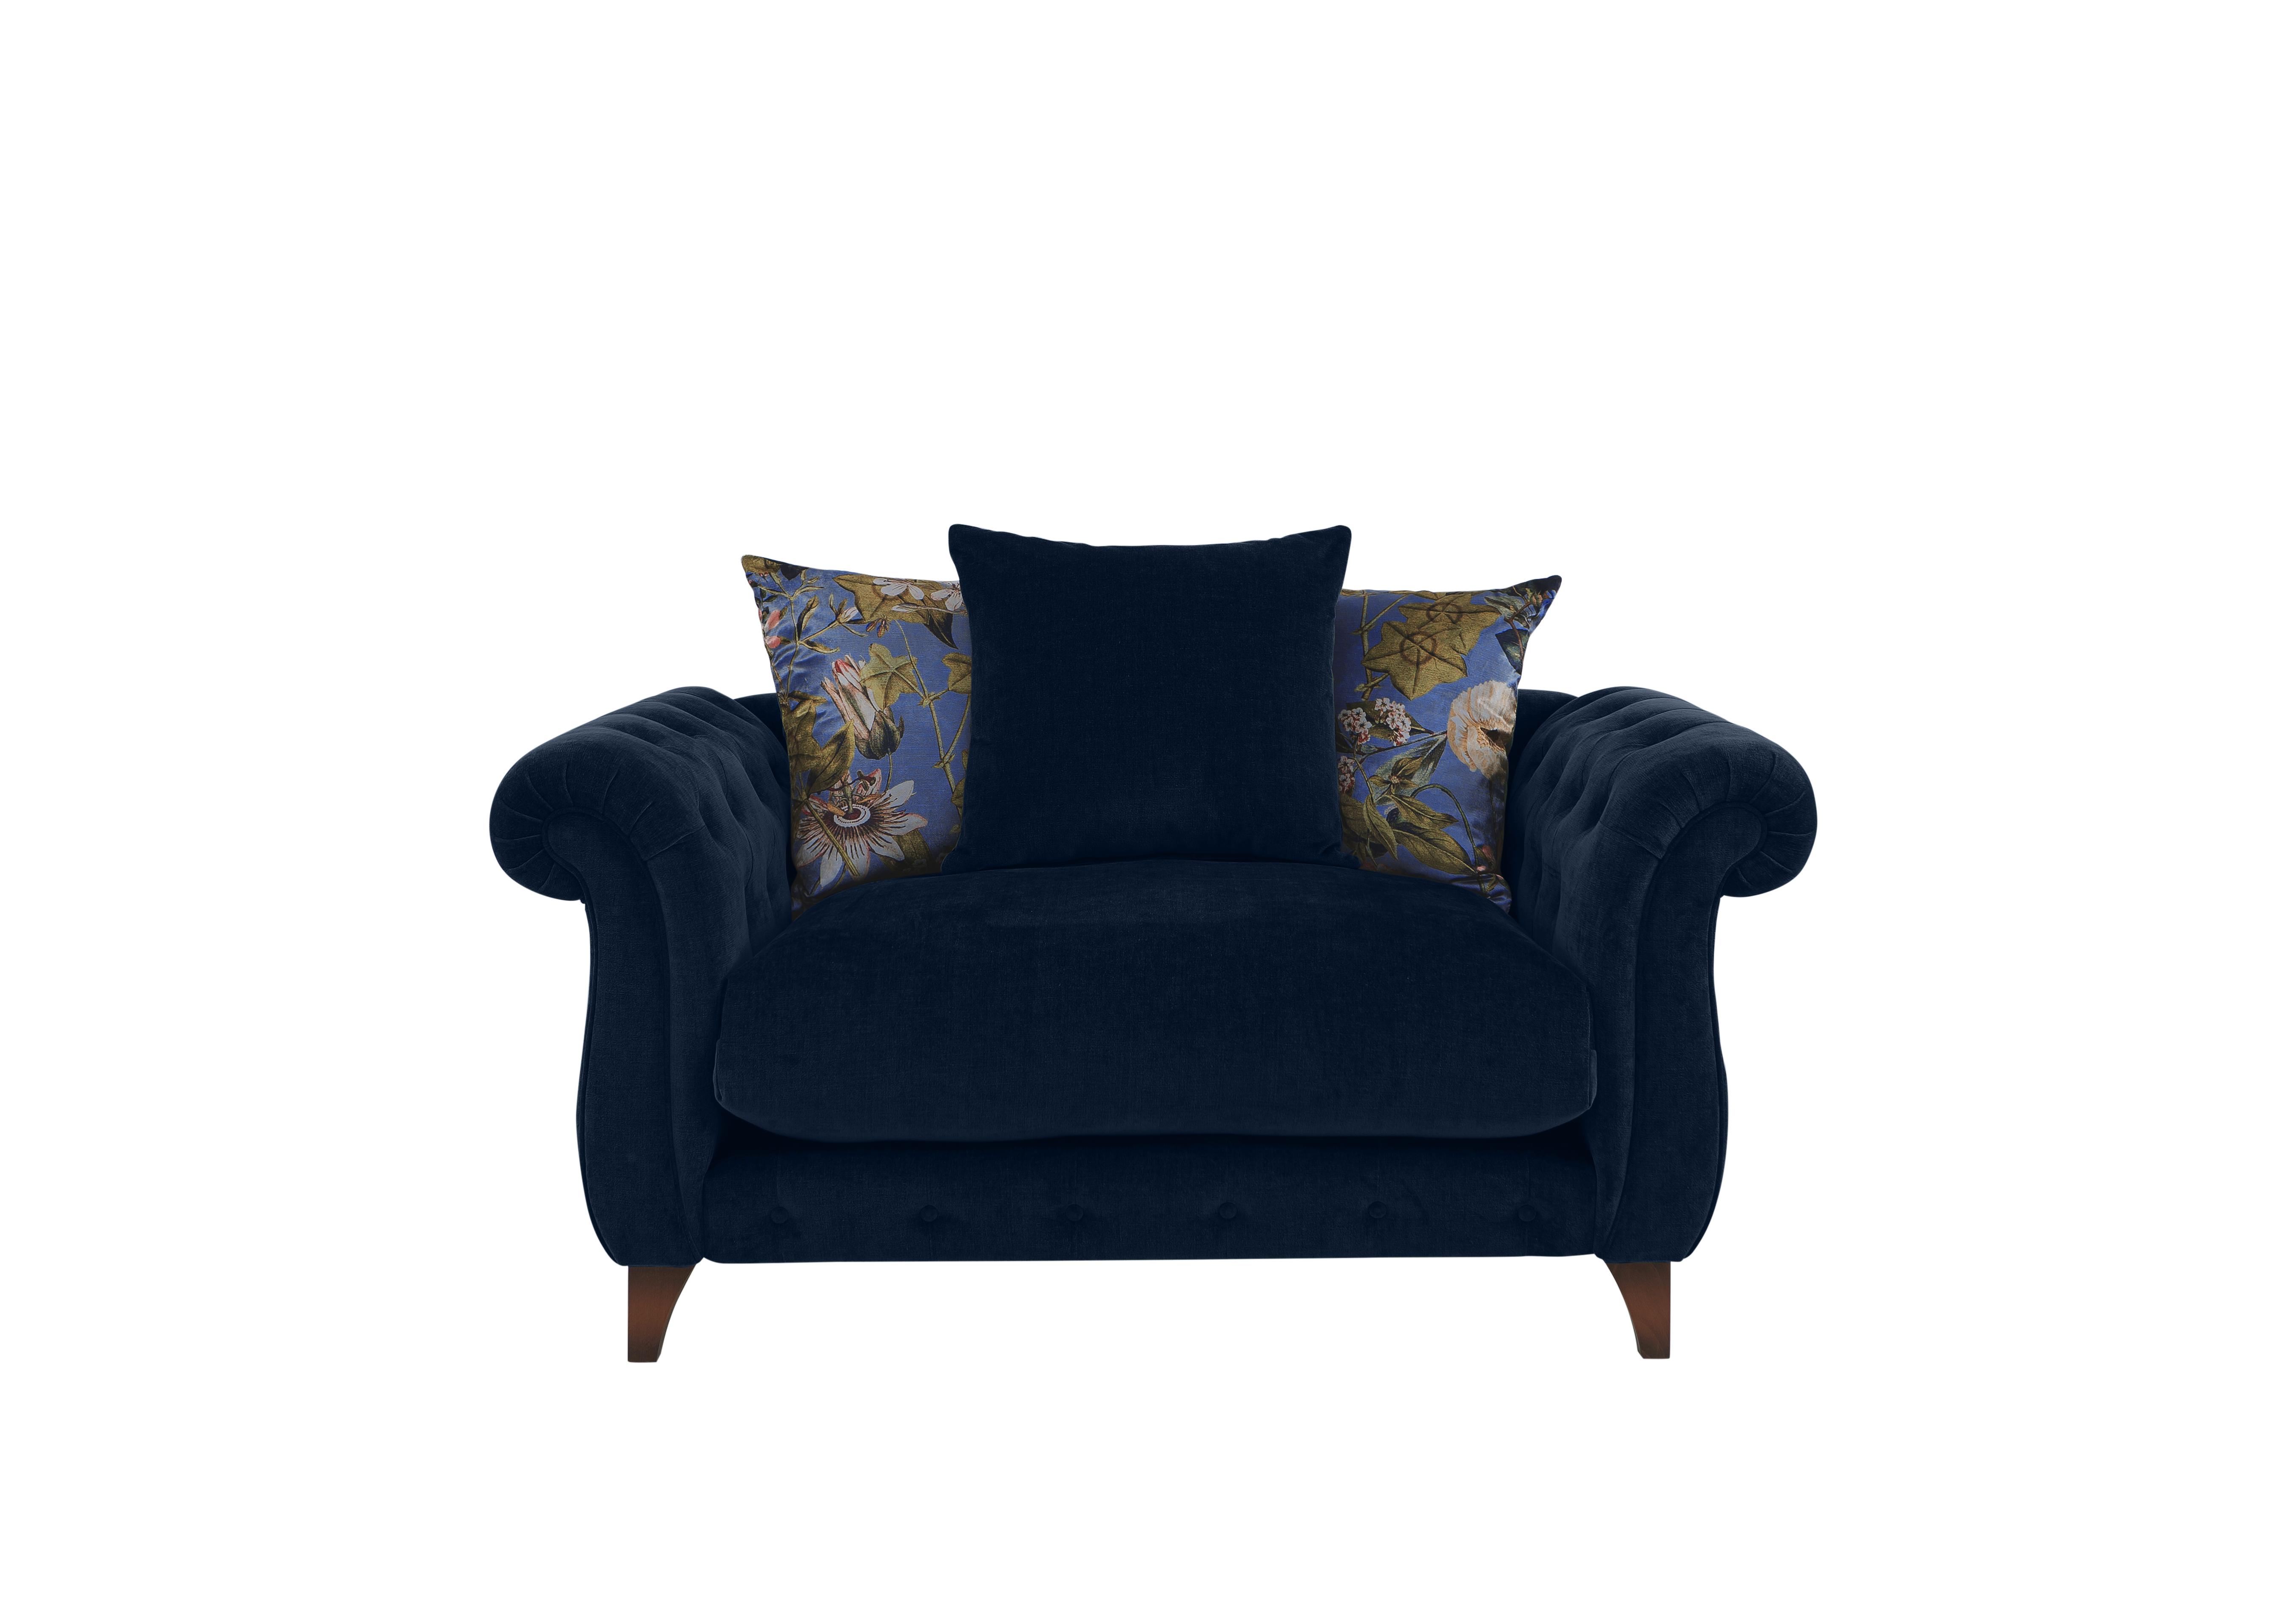 Boutique Palace Fabric Scatter Back Snuggler in Oasis Navy on Furniture Village